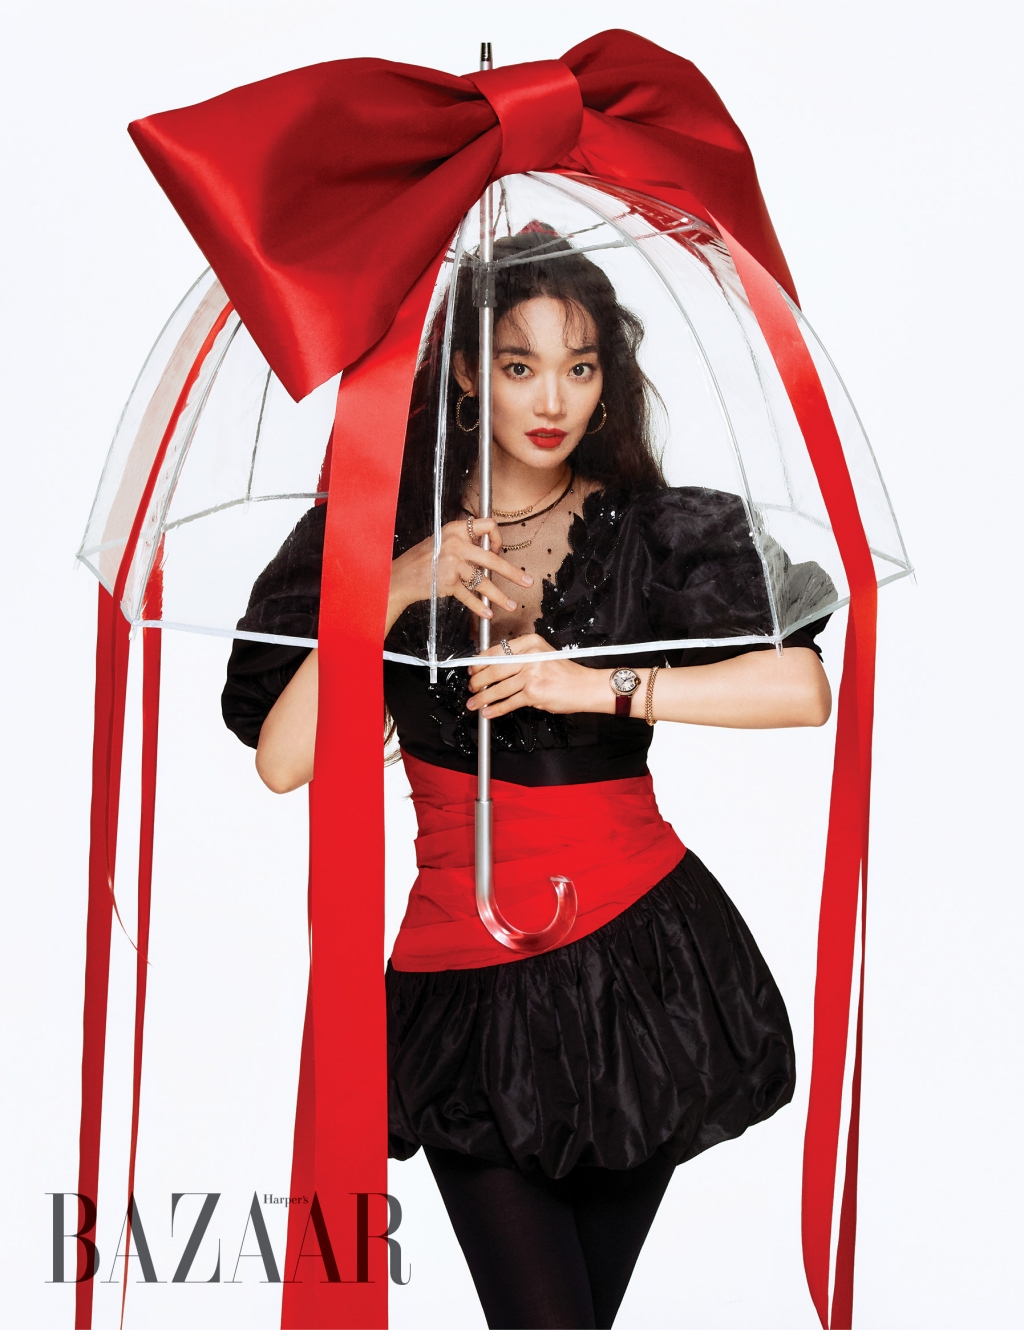 A further Holiday pictorial from Actor Shin Min-a has been released.Recently Shin Min-a showed a picture with Harpers Bazaar and Jewelry brand Cartier.Shin Min-a in the picture is a mini dress with a sense of volume and a black tights and a transform into Santa.Shin Min-a added the glamour with a gold, diamond jewelery from Cartier.In another cut, Shin Min-a is dressed in black and white costumes and holds a large gift basket: a glamorous Rose Watch and jewelery attract Sight.Meanwhile, Shin Min-a is in public with Actor Kim Woo-bin.Shin Min-a recently met with audiences with the movie Diva and is about to release a new movie Leave.